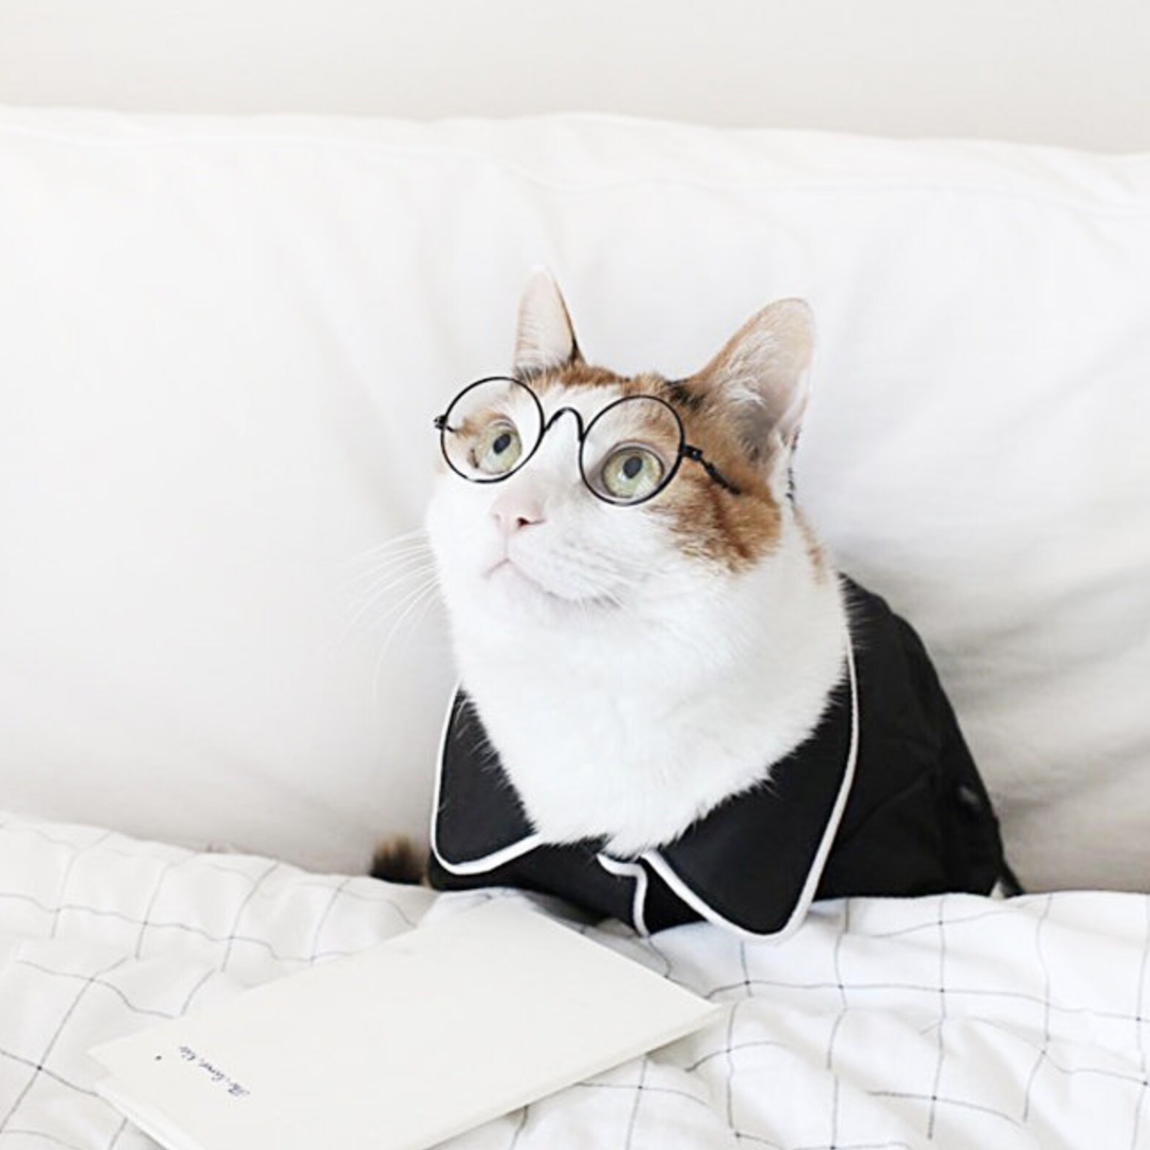 A white cat with brownish spots is tucked into a white bed in black pajamas with a pair of round wire frame glasses on its face